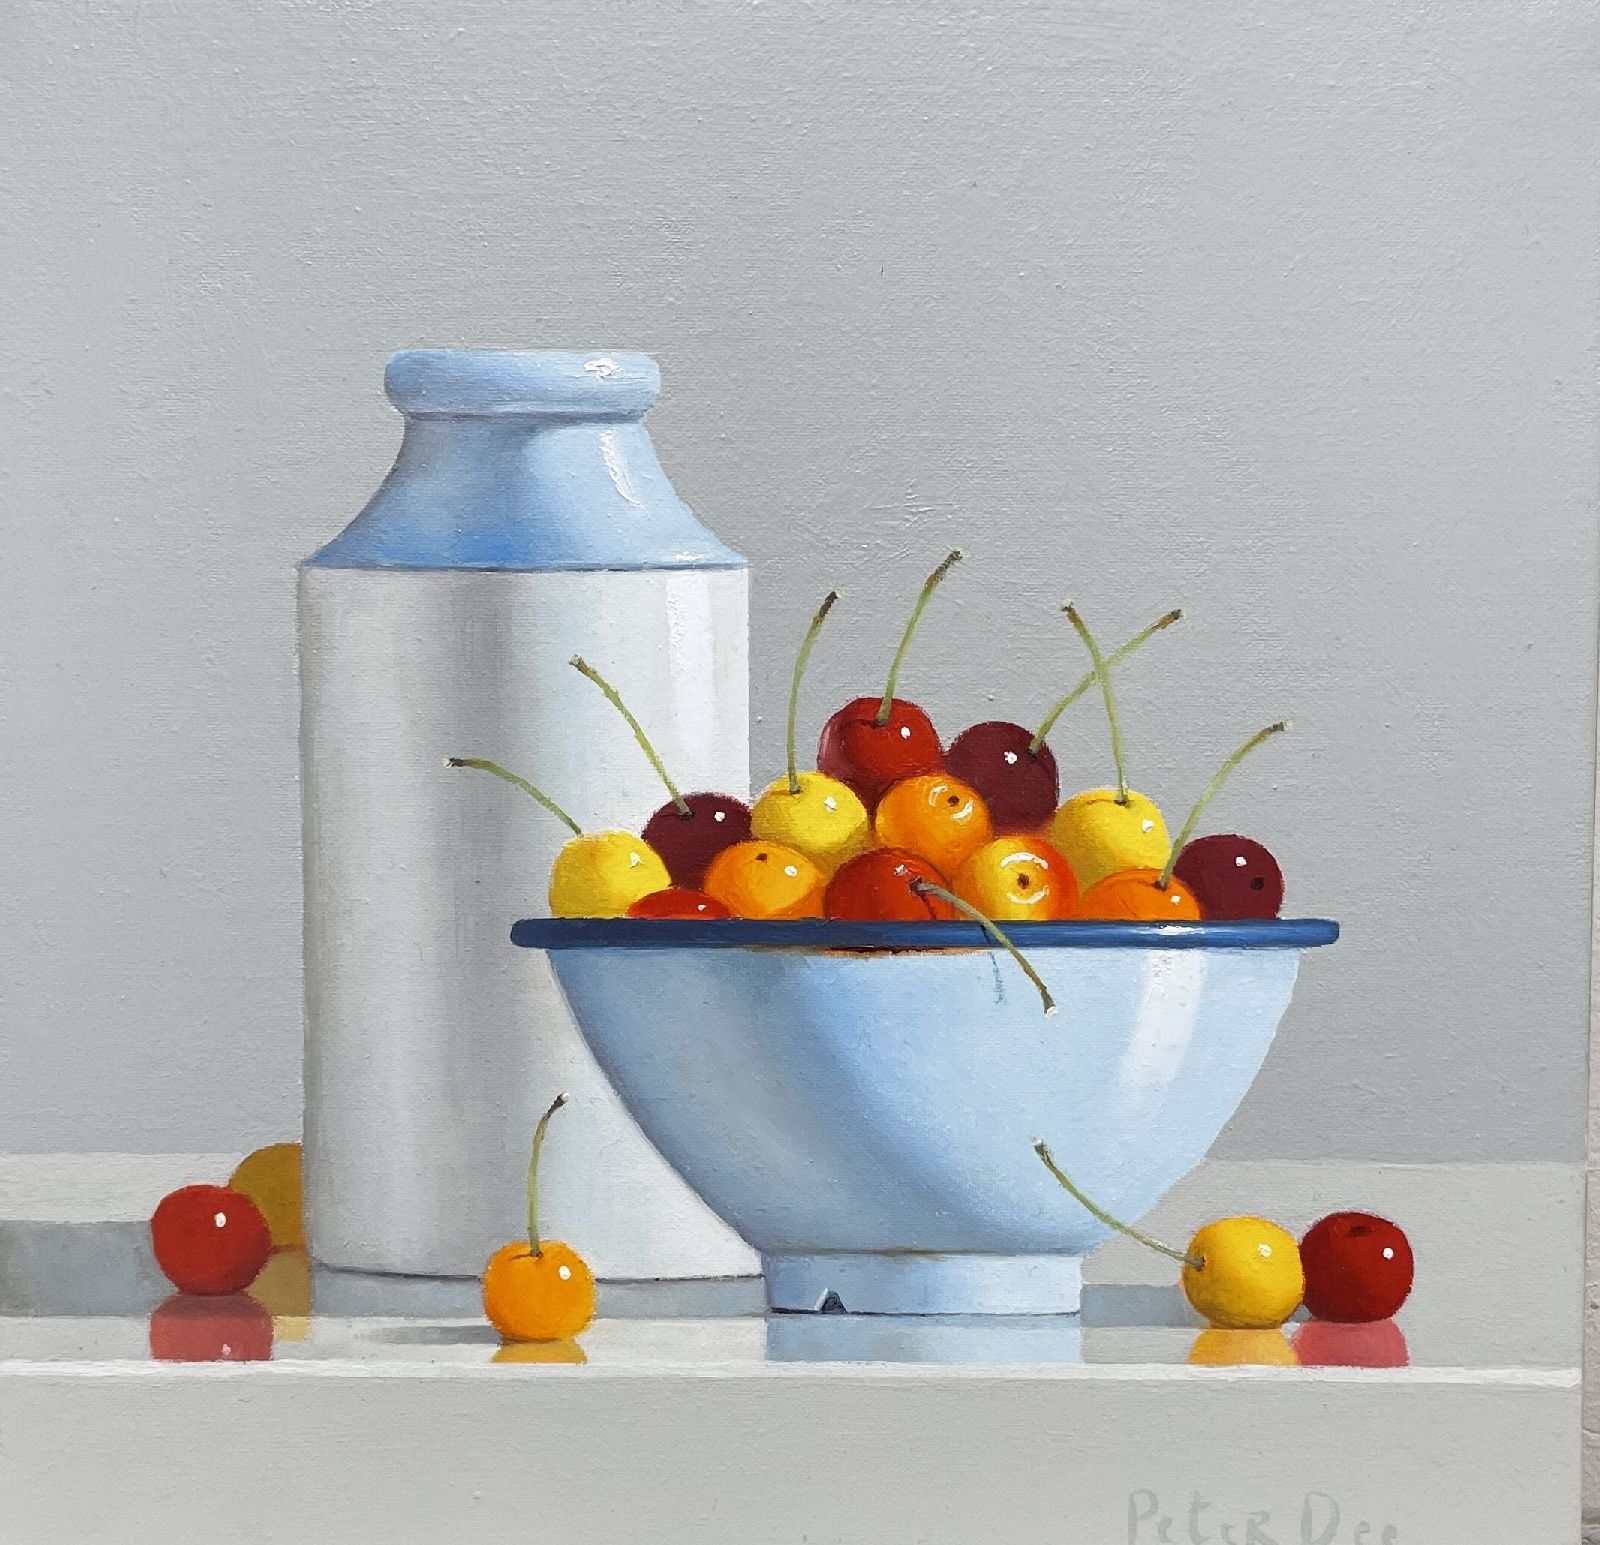 Vintage Blue Enamel Bowl with Rainier Cherries and Stoneware Bottle by Peter Dee